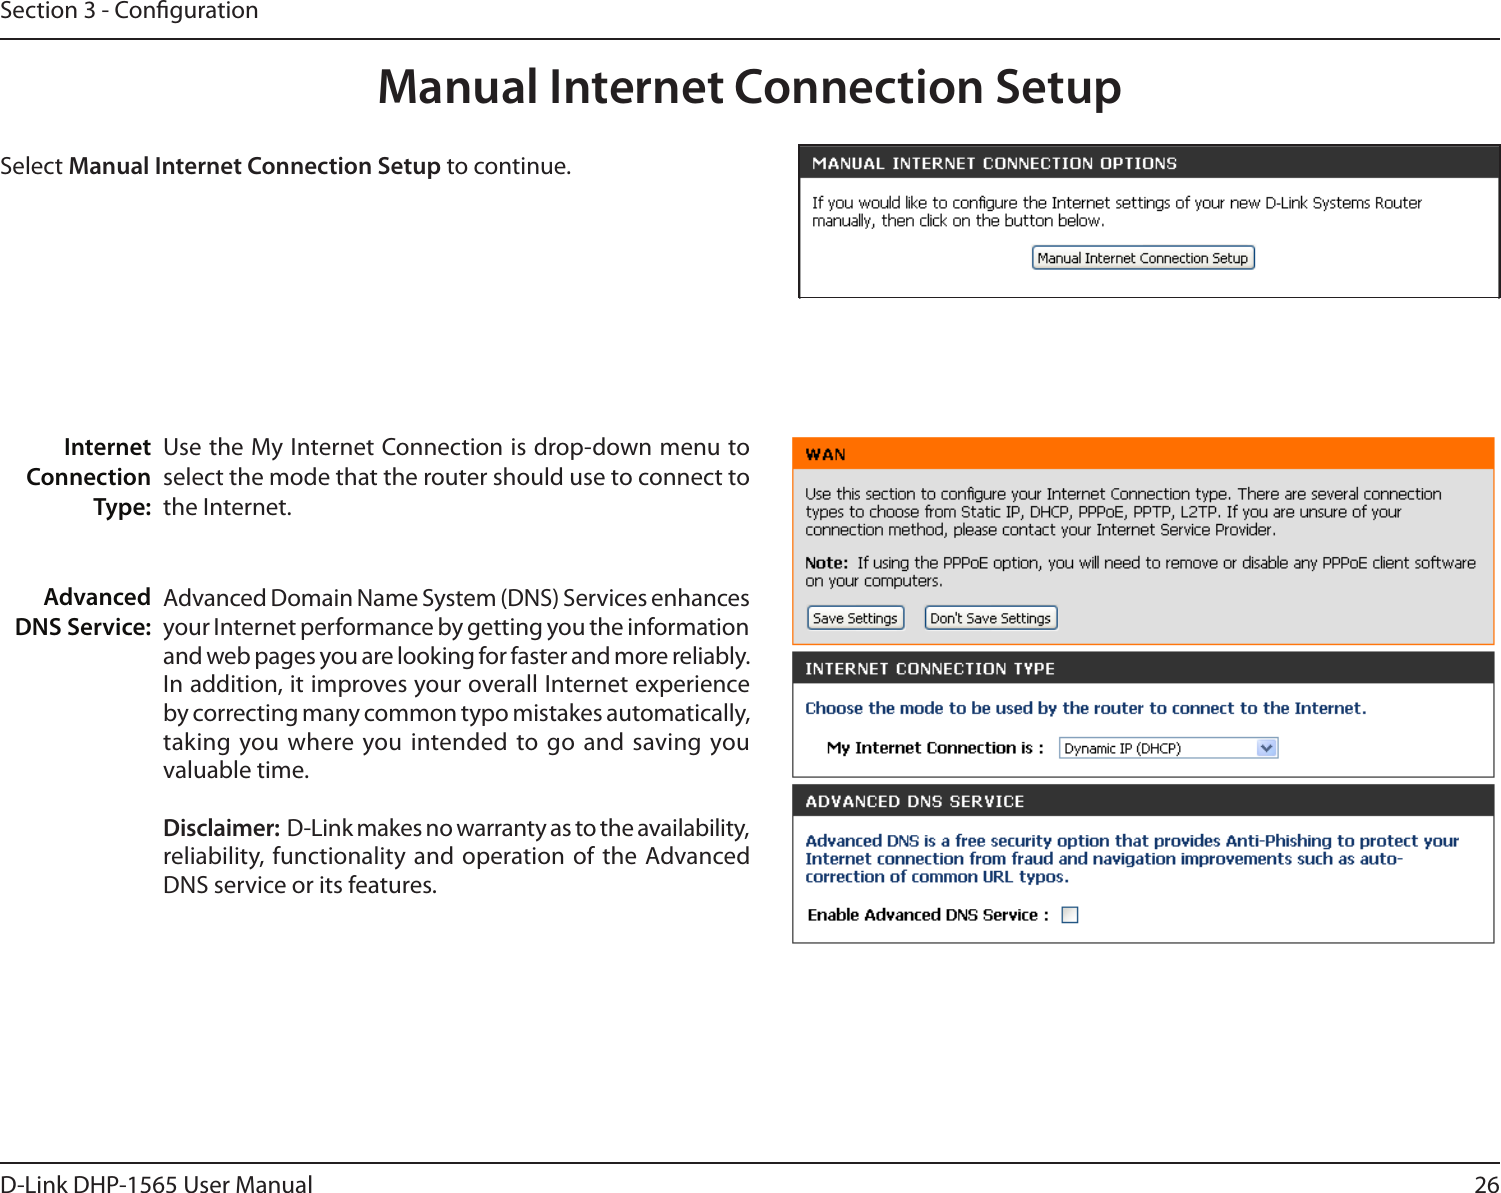 26D-Link DHP-1565 User ManualSection 3 - CongurationManual Internet Connection SetupUse the My Internet Connection is drop-down menu to select the mode that the router should use to connect to the Internet.Advanced Domain Name System (DNS) Services enhances your Internet performance by getting you the information and web pages you are looking for faster and more reliably. In addition, it improves your overall Internet experience by correcting many common typo mistakes automatically, taking you where you intended to go and saving you valuable time. Disclaimer:  D-Link makes no warranty as to the availability, reliability, functionality and operation of the Advanced DNS service or its features. Internet Connection Type:Advanced DNS Service:Select Manual Internet Connection Setup to continue. 